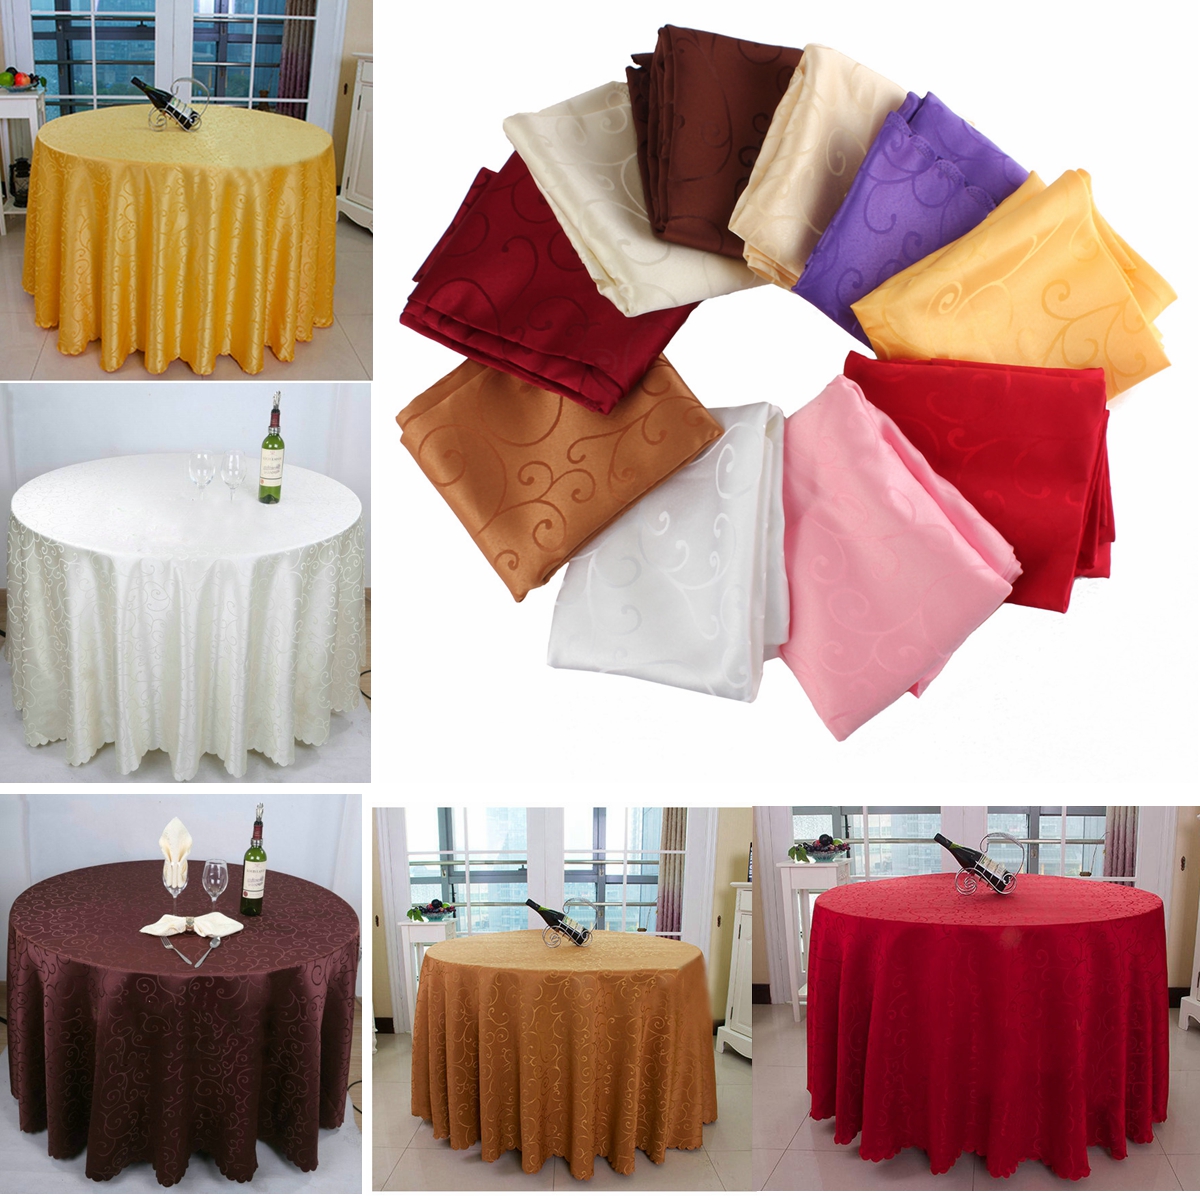 180cm-Polyester-Absorbent-Round-Tablecloth-For-Hotel-Restaurant-Wedding-Decor-1033472-1